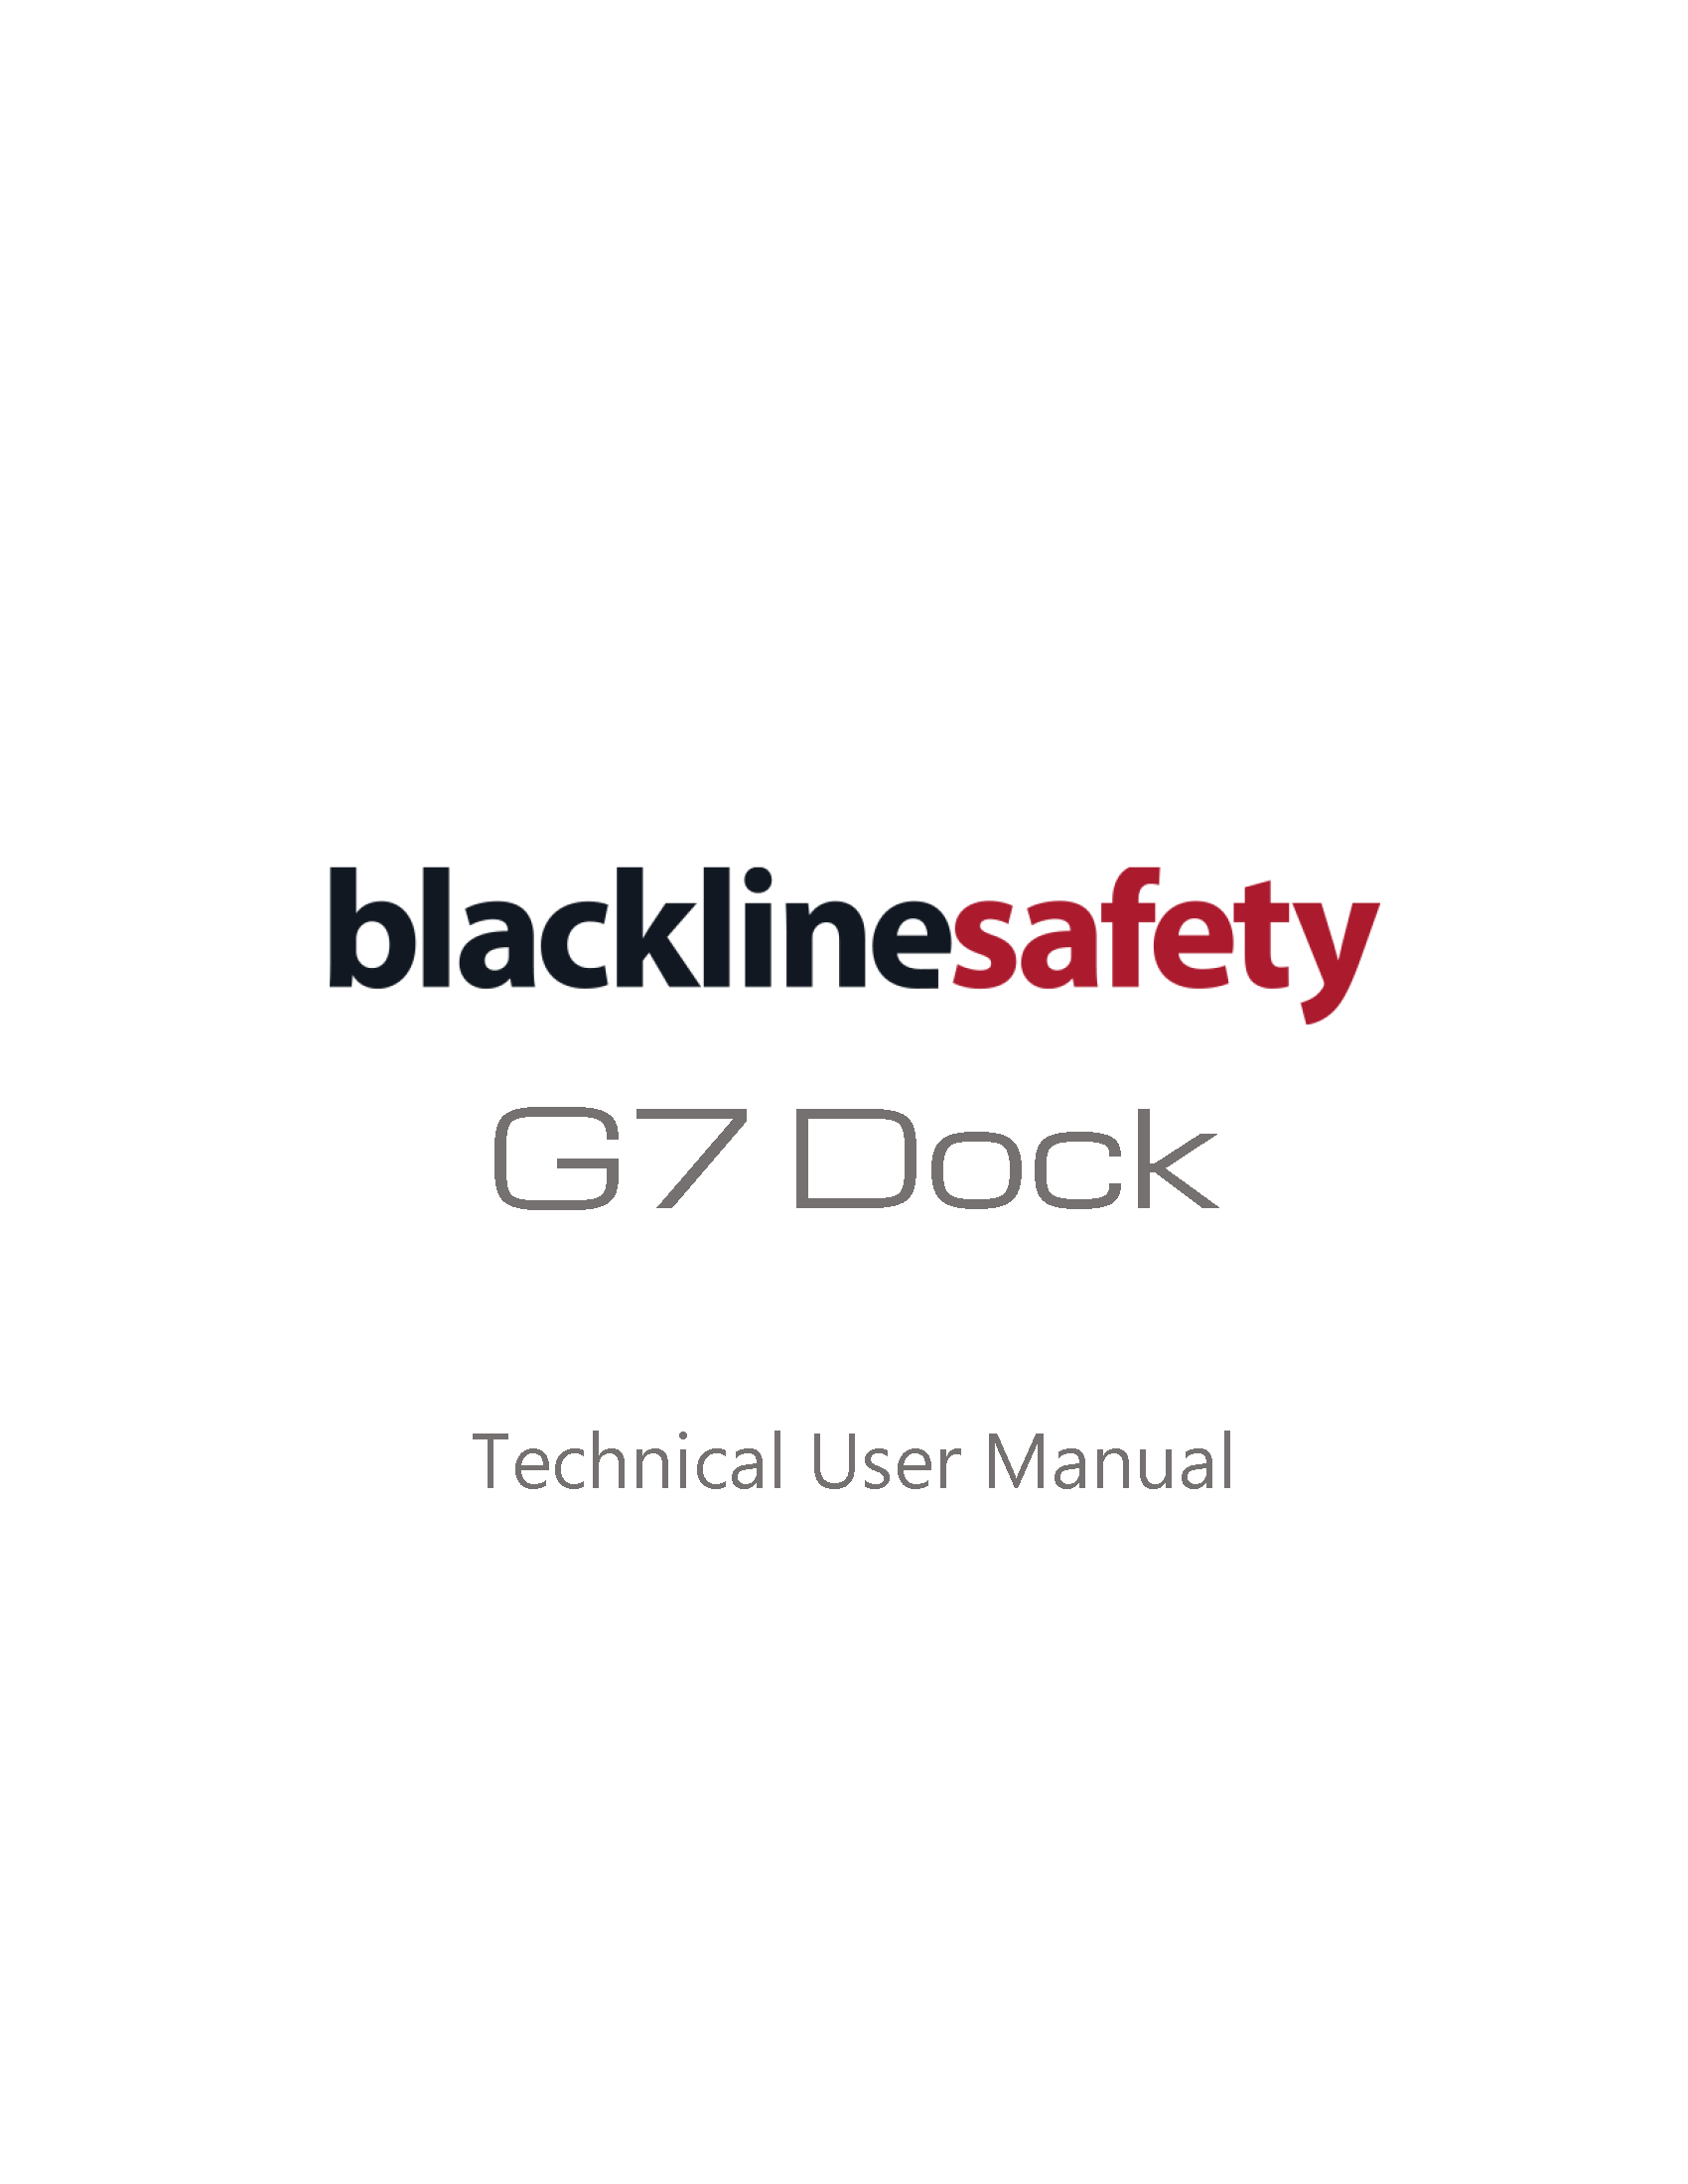 G7 Dock Technical User Manual Cover